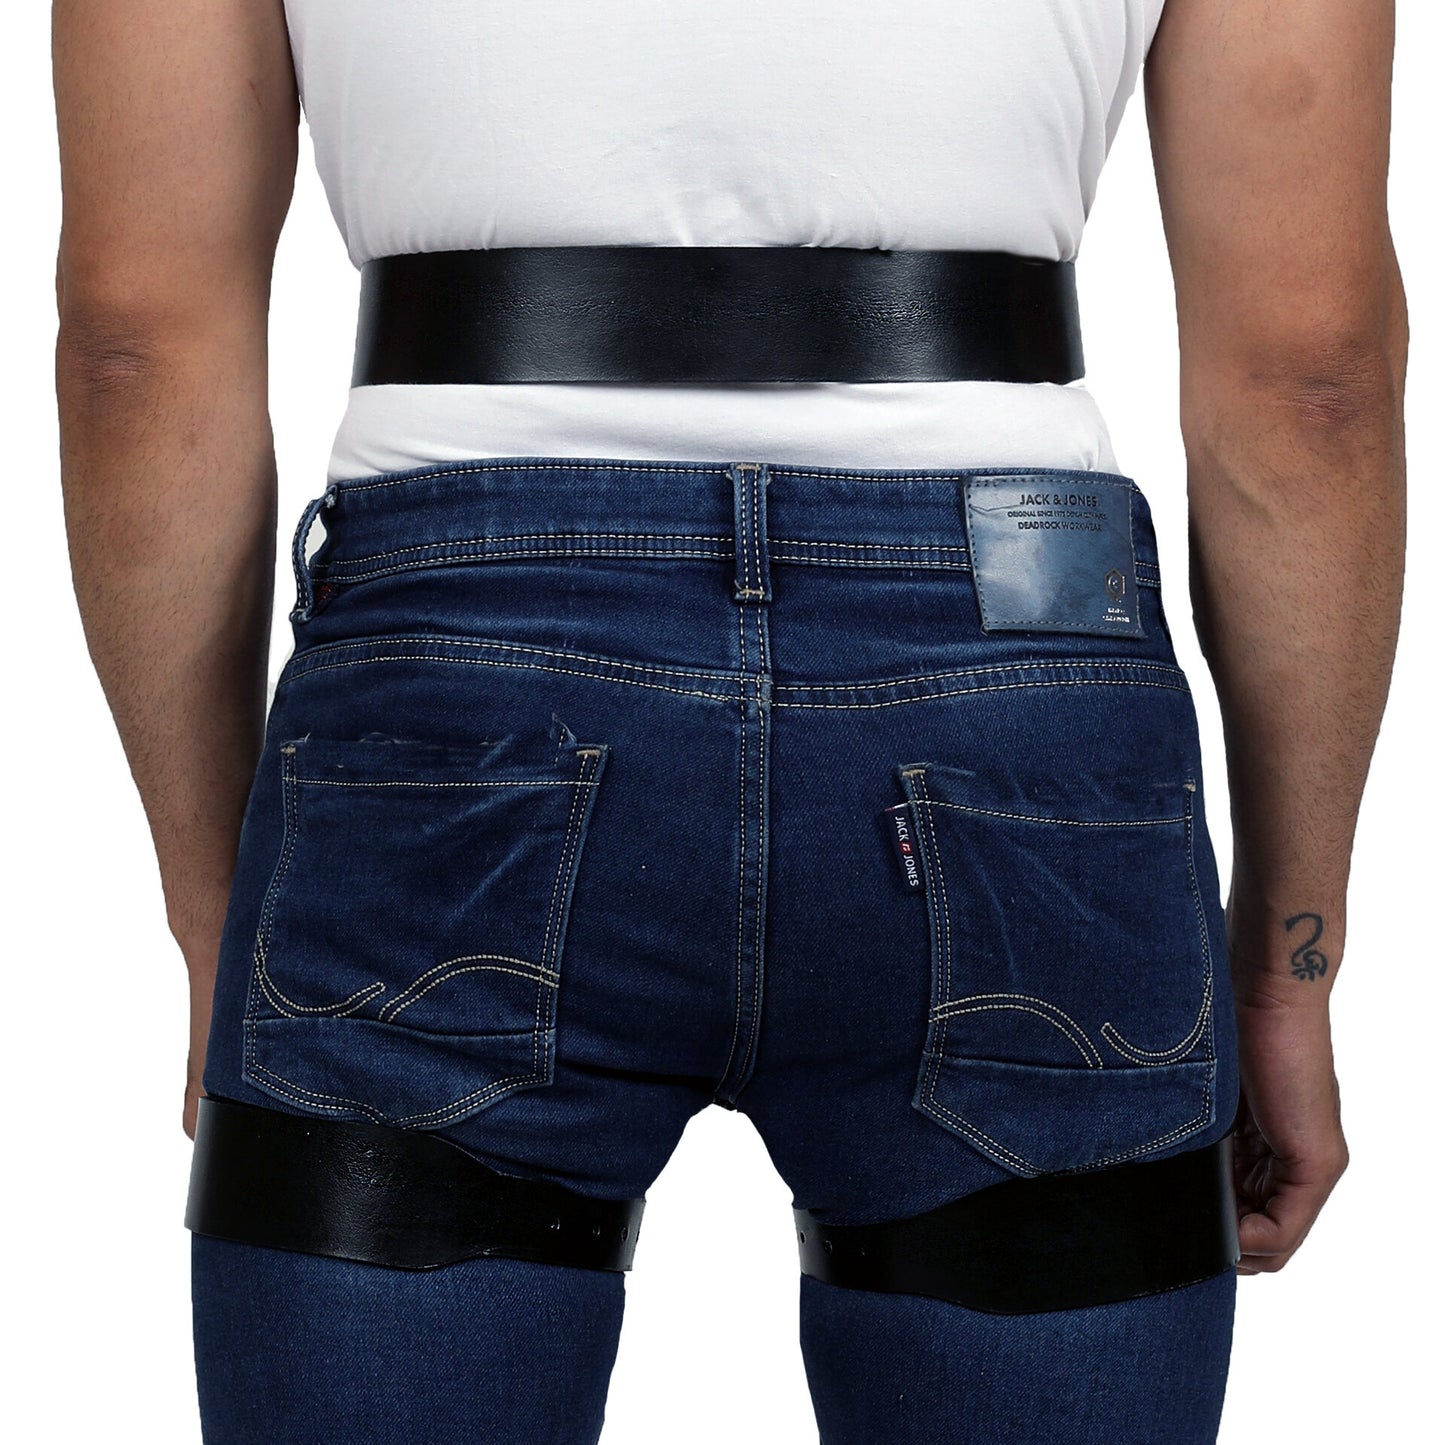 MENS LEATHER THIGH SUSPENDER - Subculture